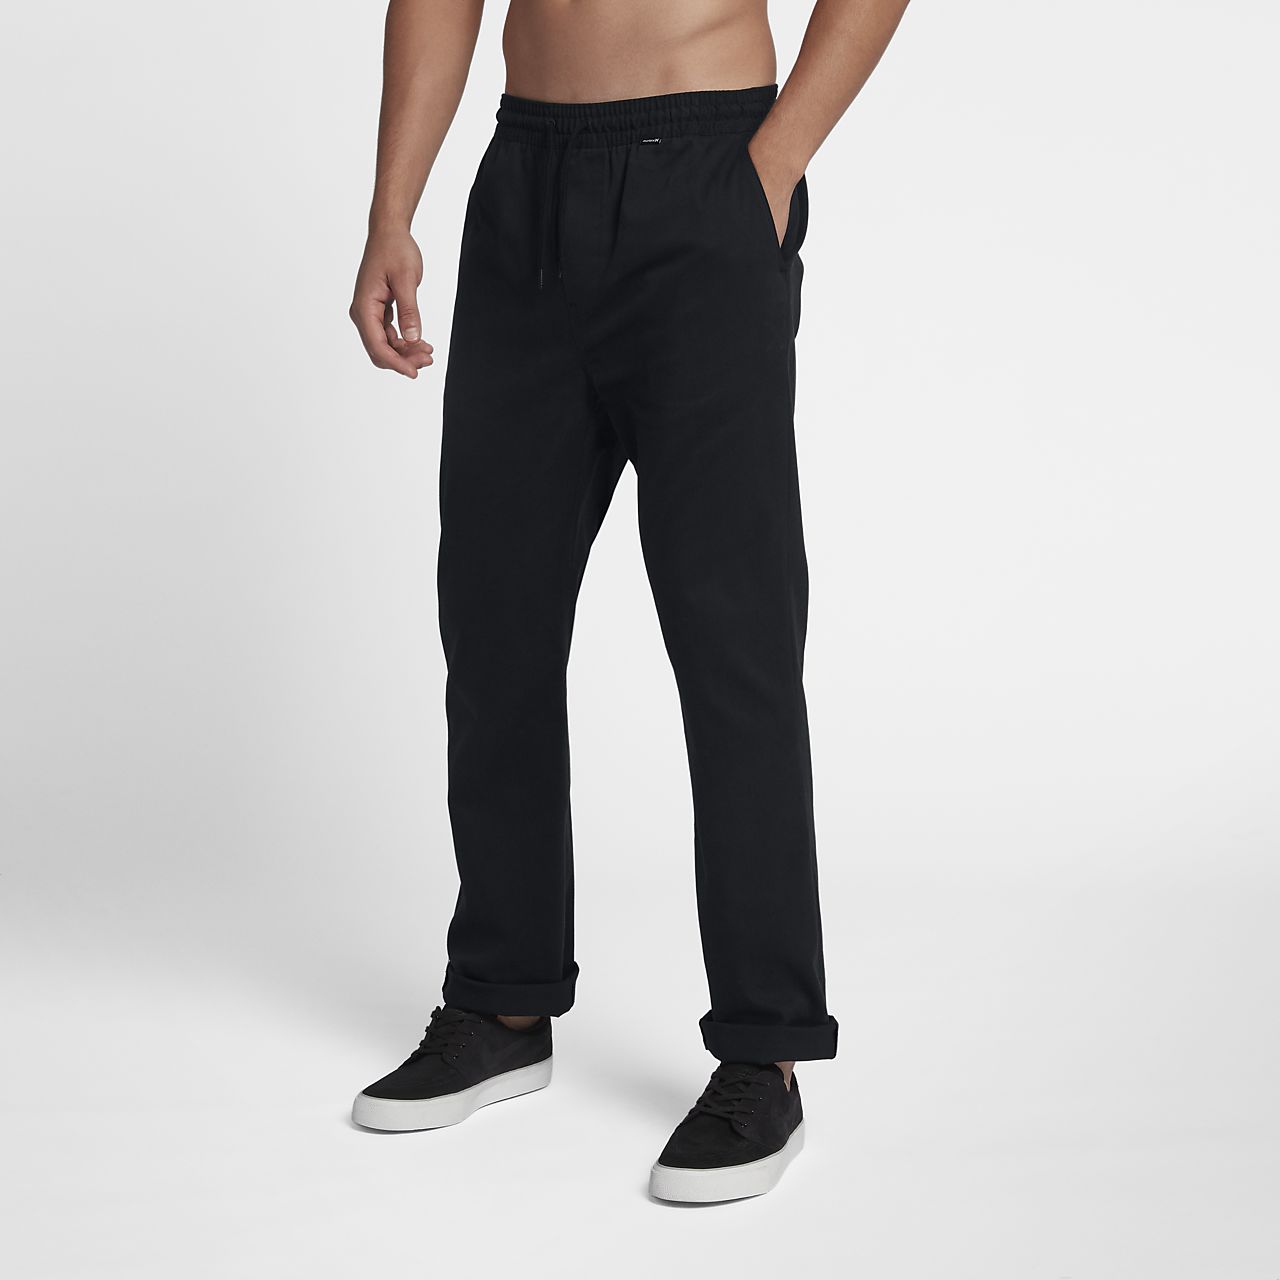 hurley dri fit trousers